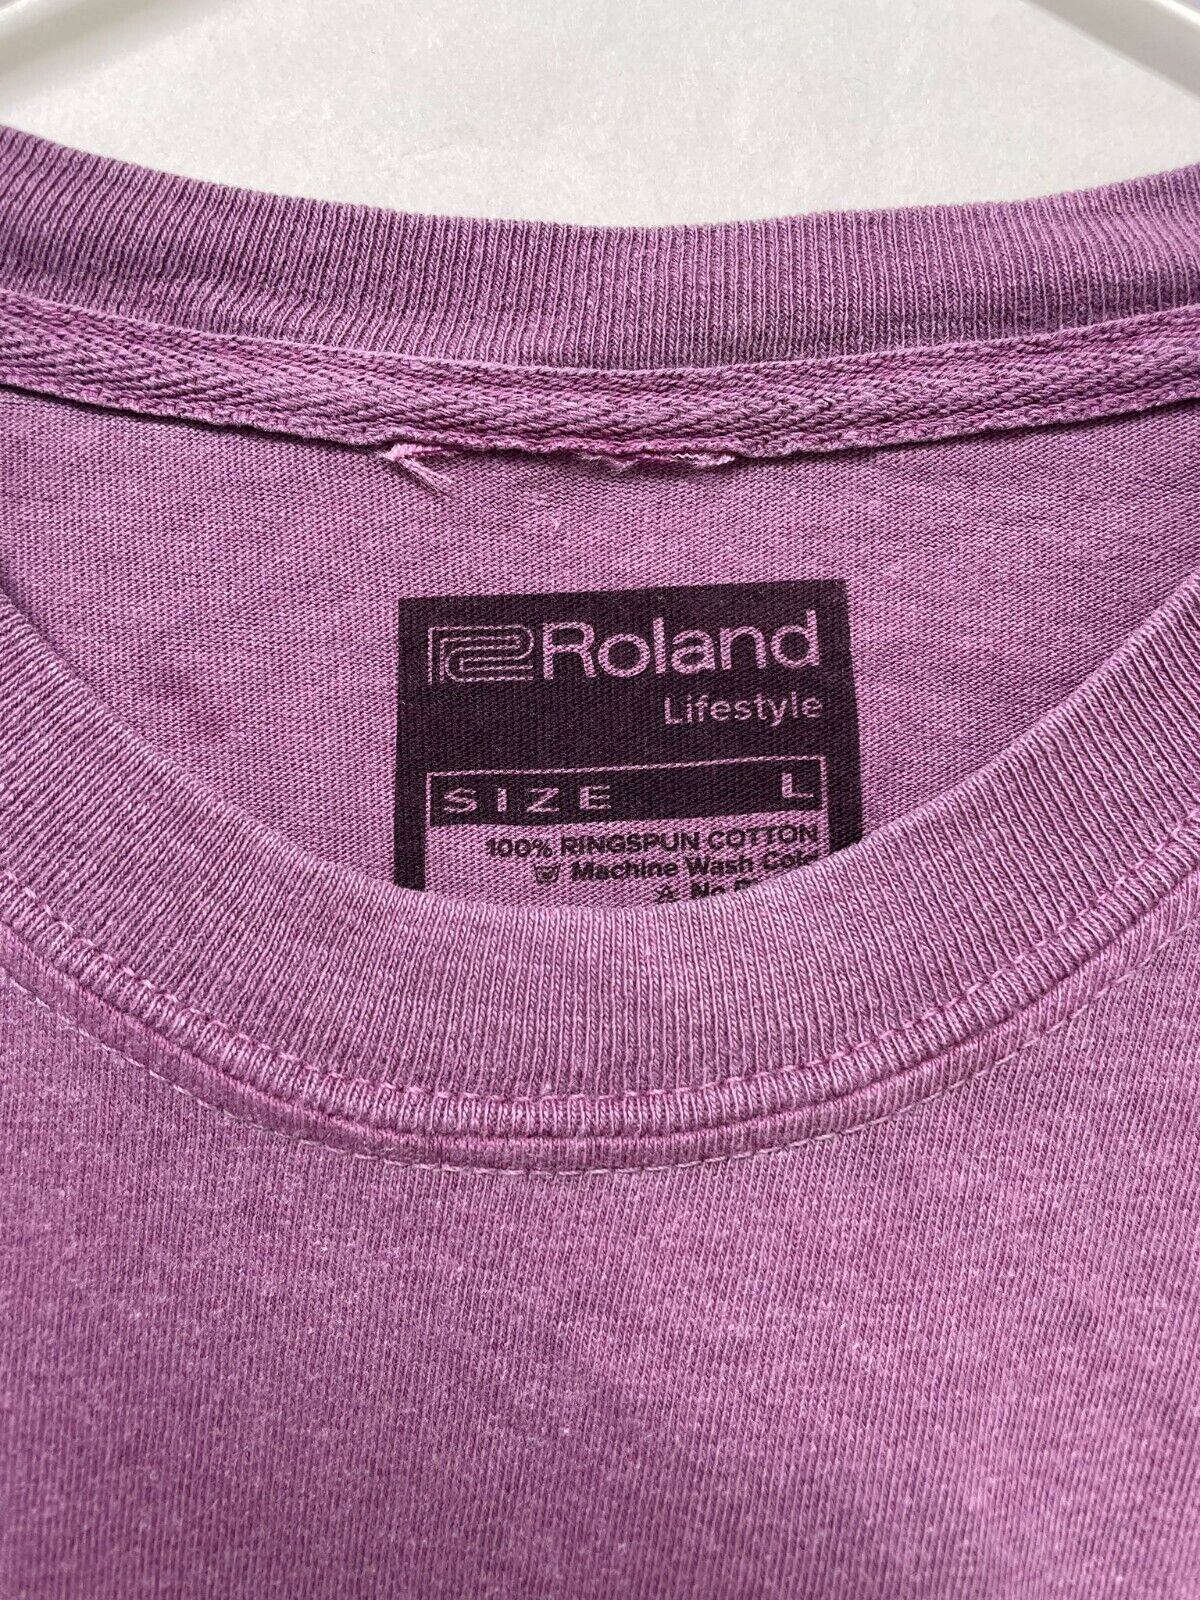 Roland Electronic Musical Instruments Mens L Lot of 3 909 House T Shirt Hat EDM